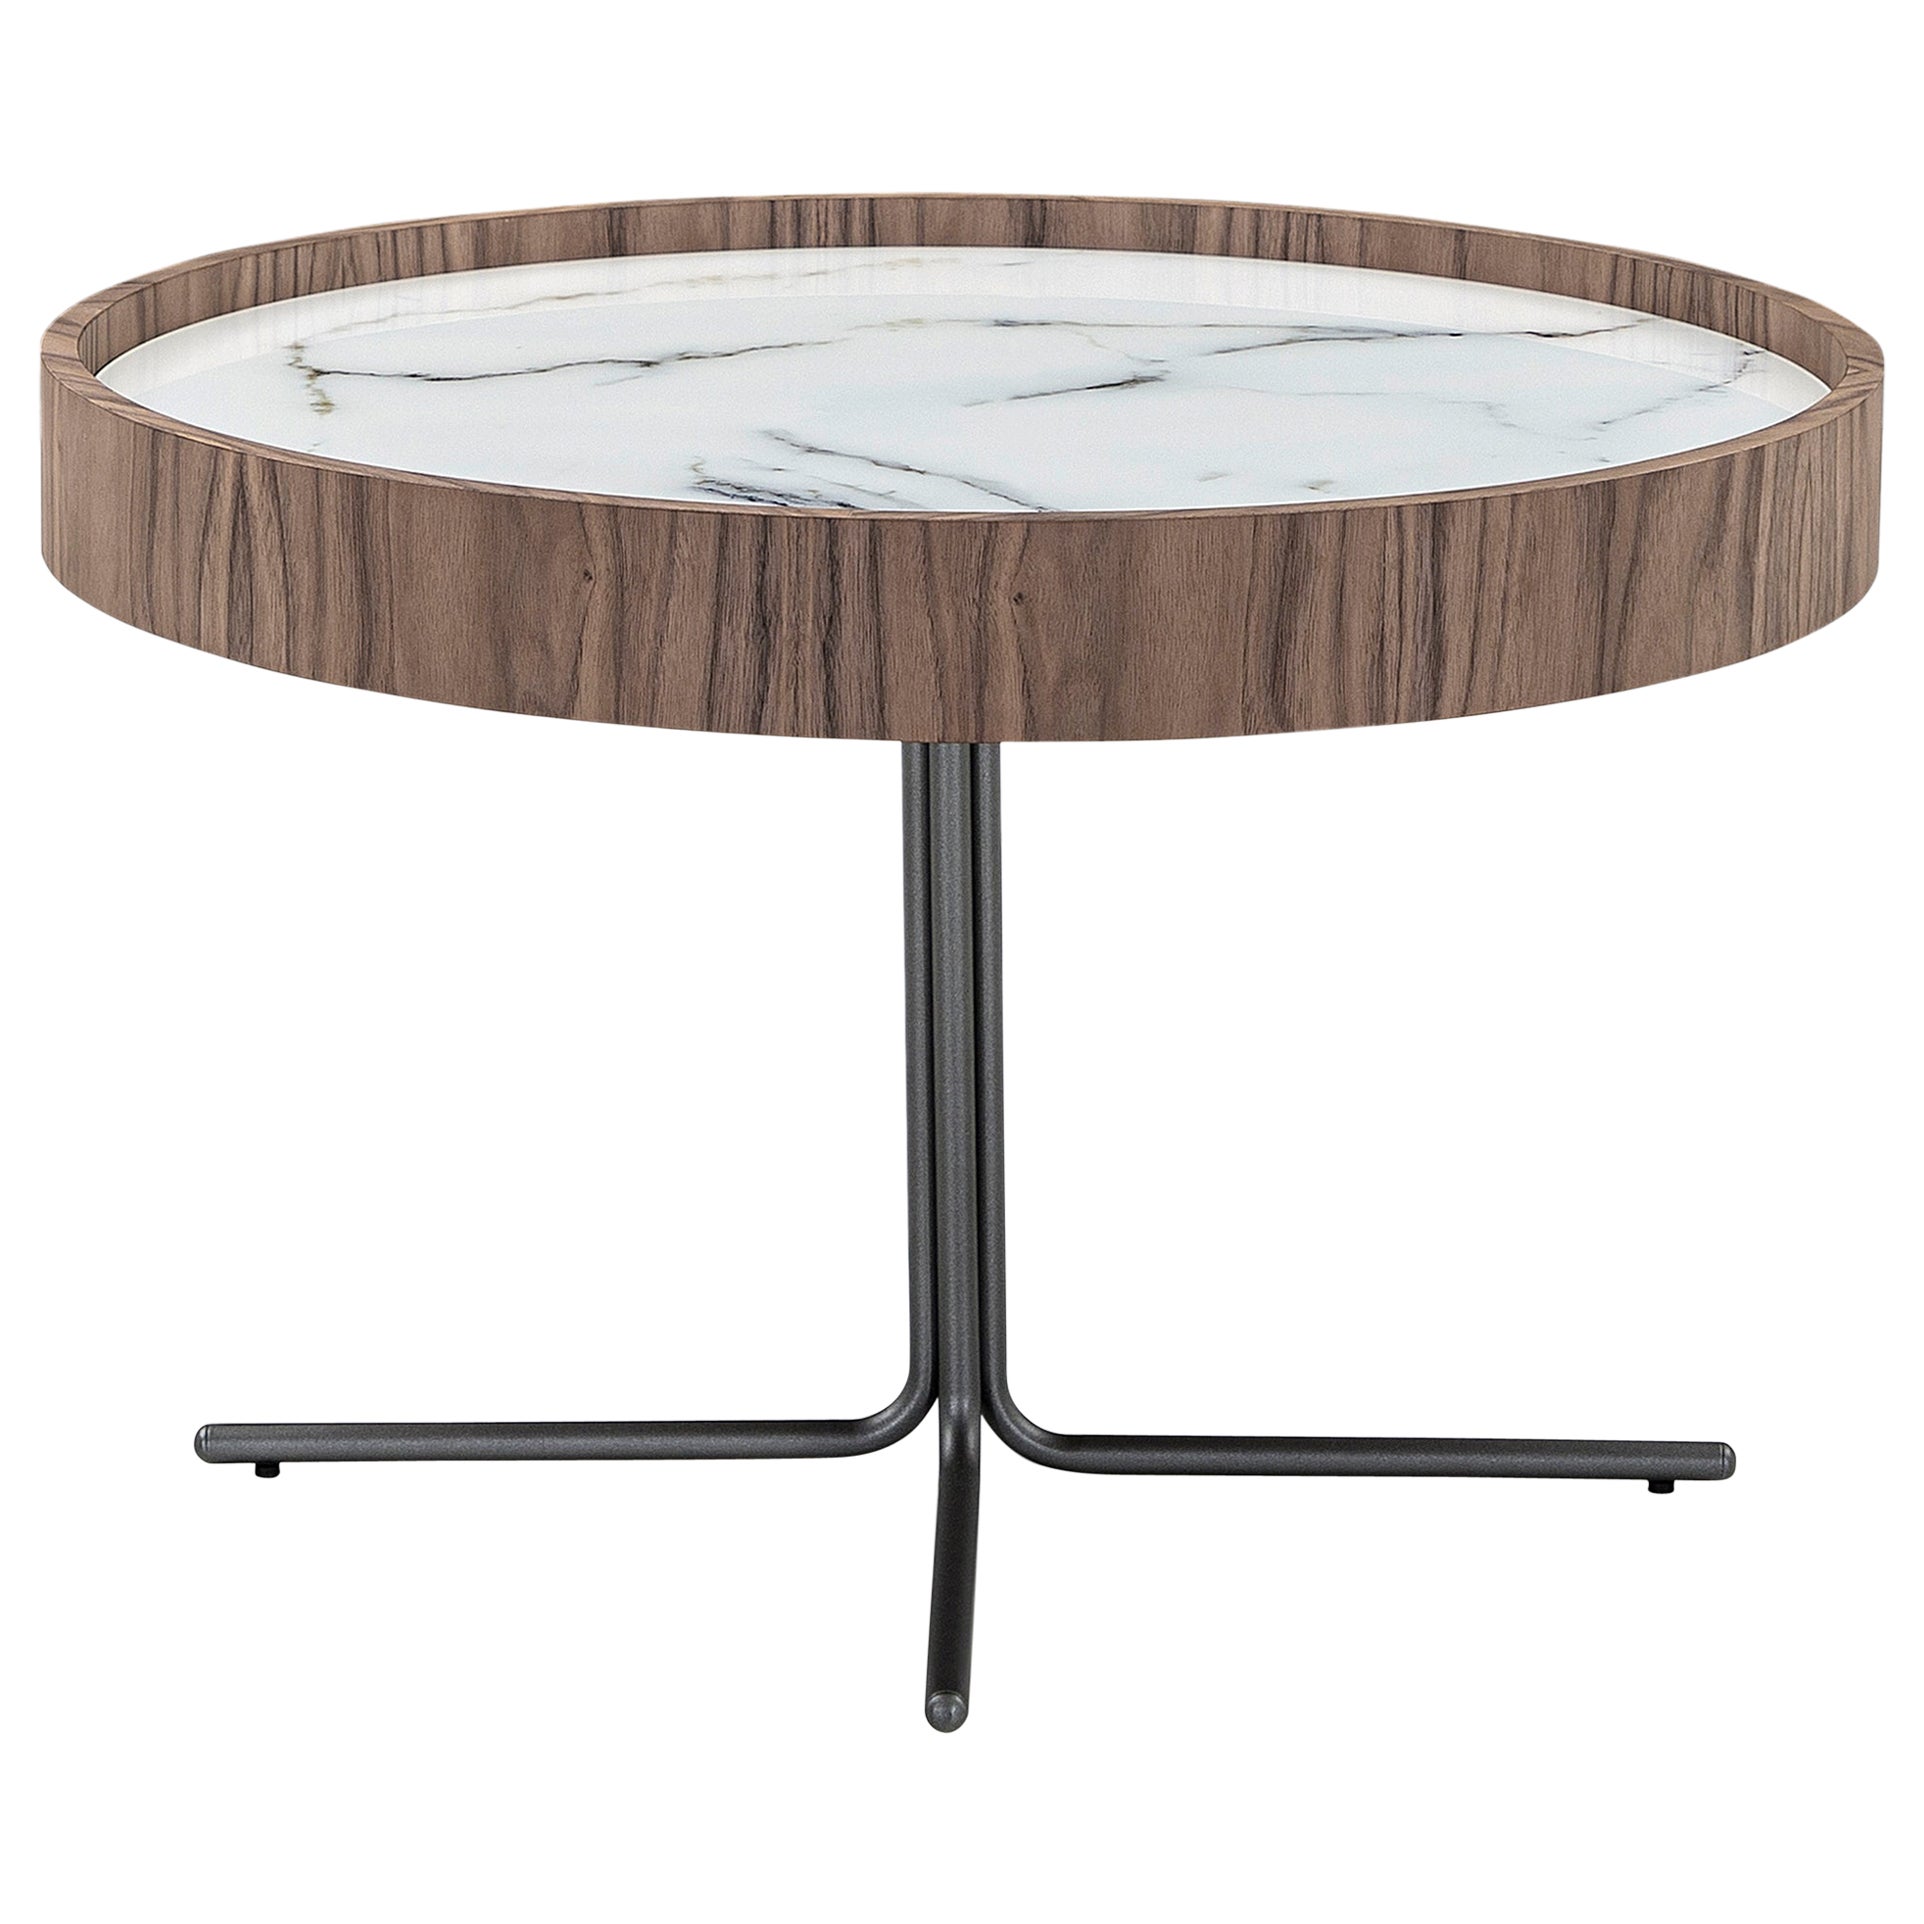 Regia Occasional Table in Walnut Wood Finish Featuring White Glass 26''